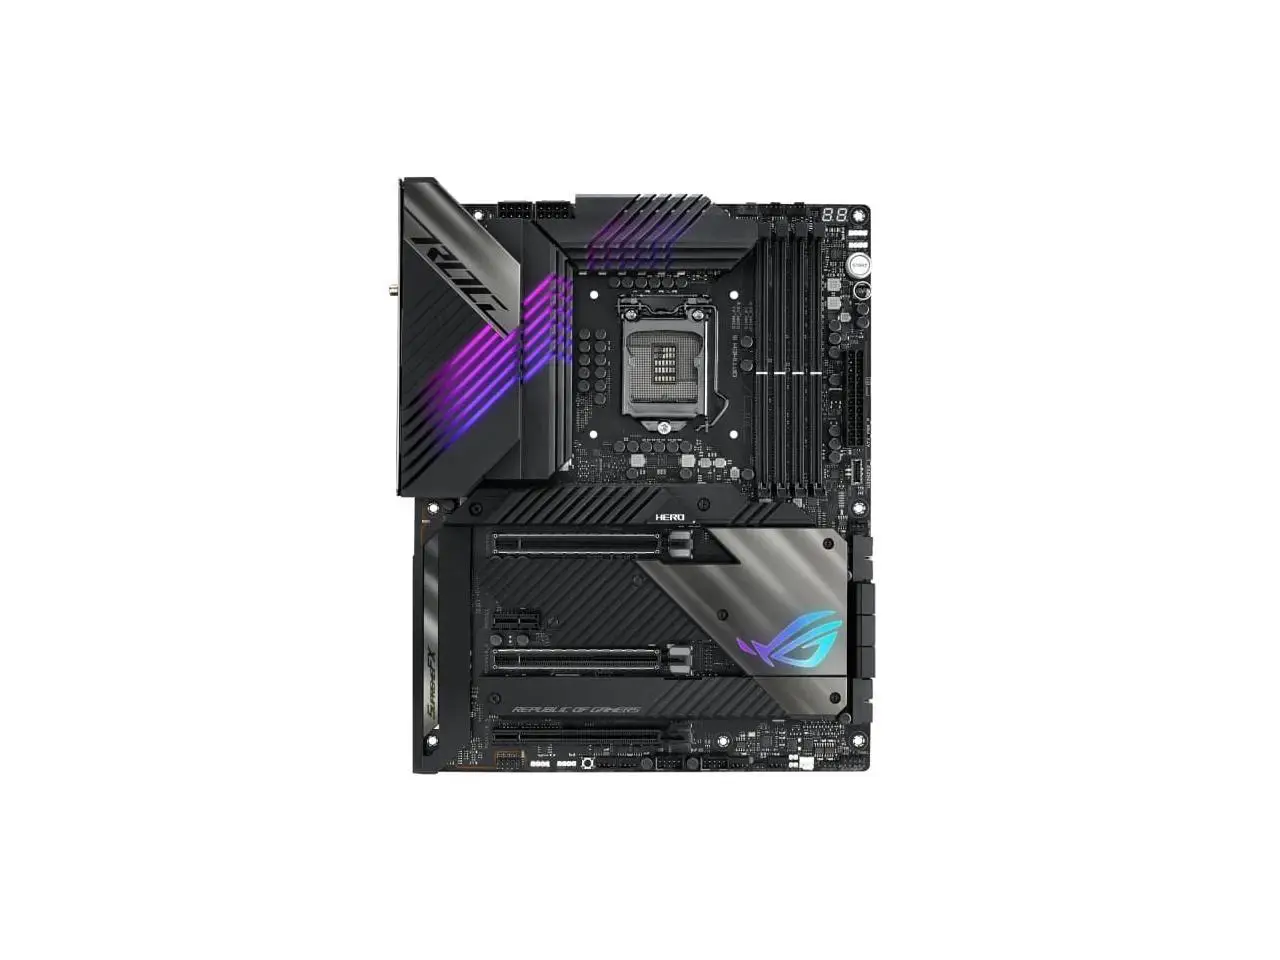 

ASUS ROG Maximus XIII Hero (WiFi 6E) Z590 LGA 1200 (Intel 11th/10th Gen) ATX Gaming Motherboard (PCIe 4.0, 14+2 Power Stages,